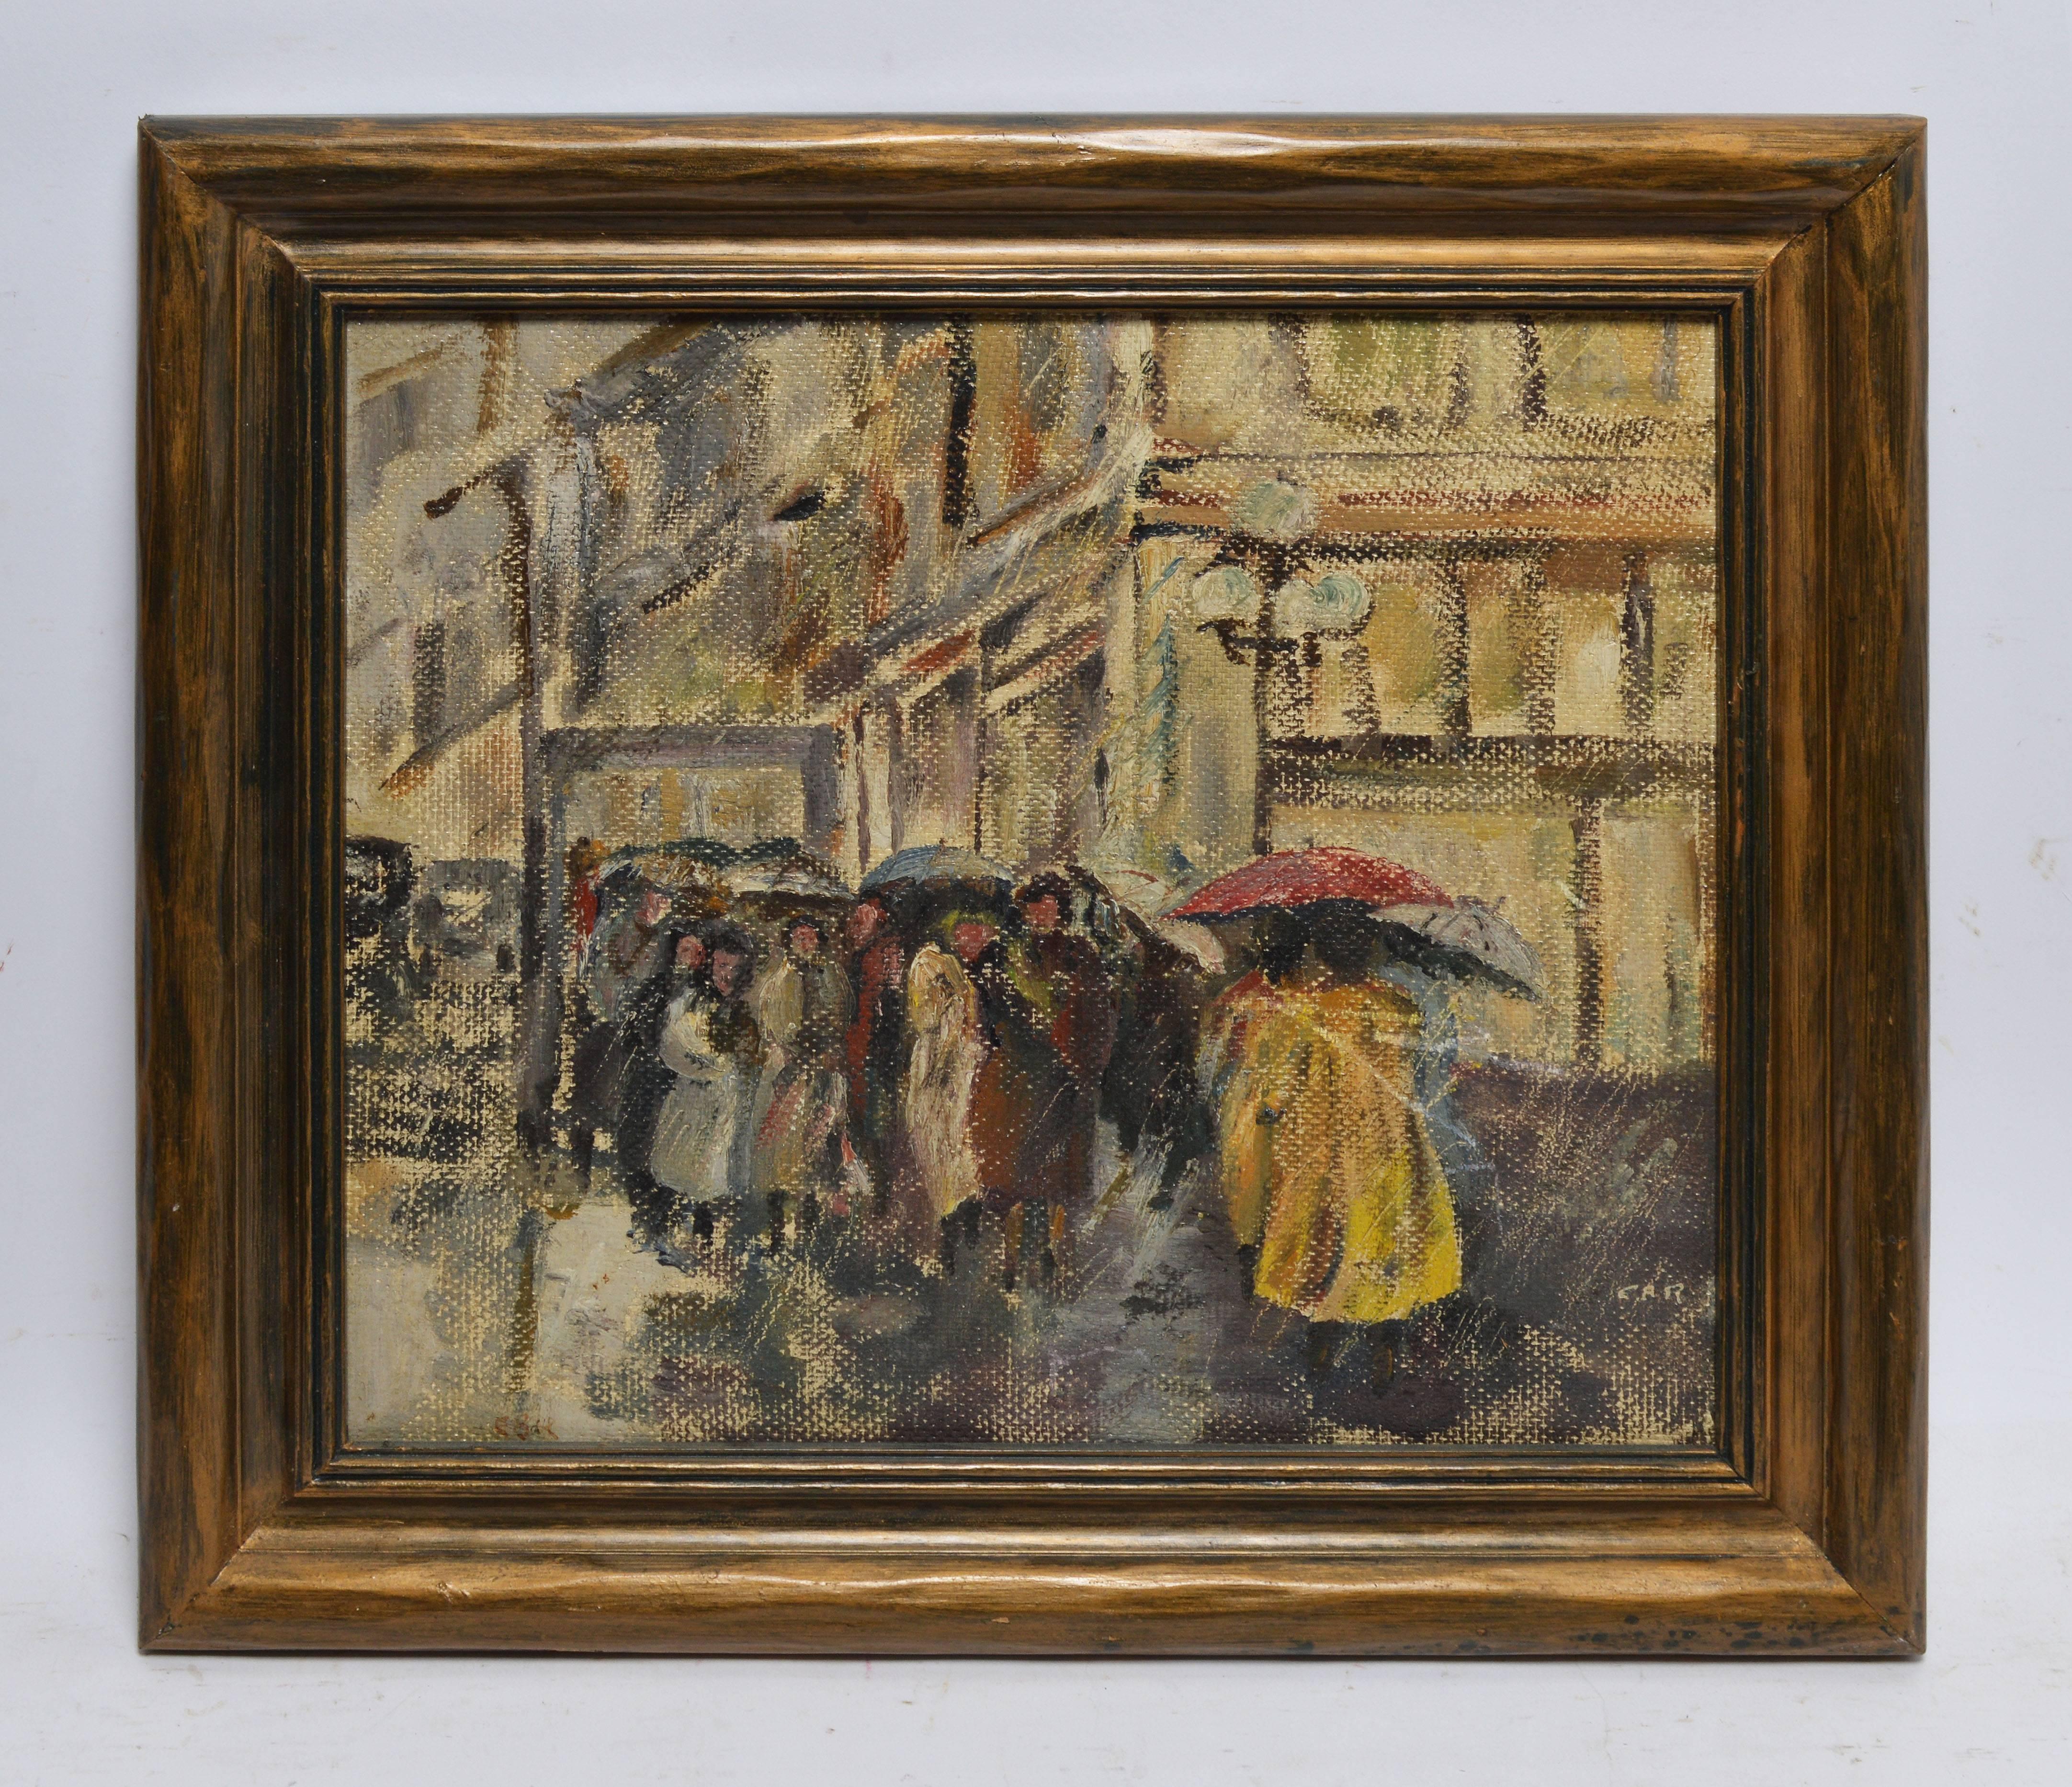 Modernist View of a Rainy Street - Painting by Unknown